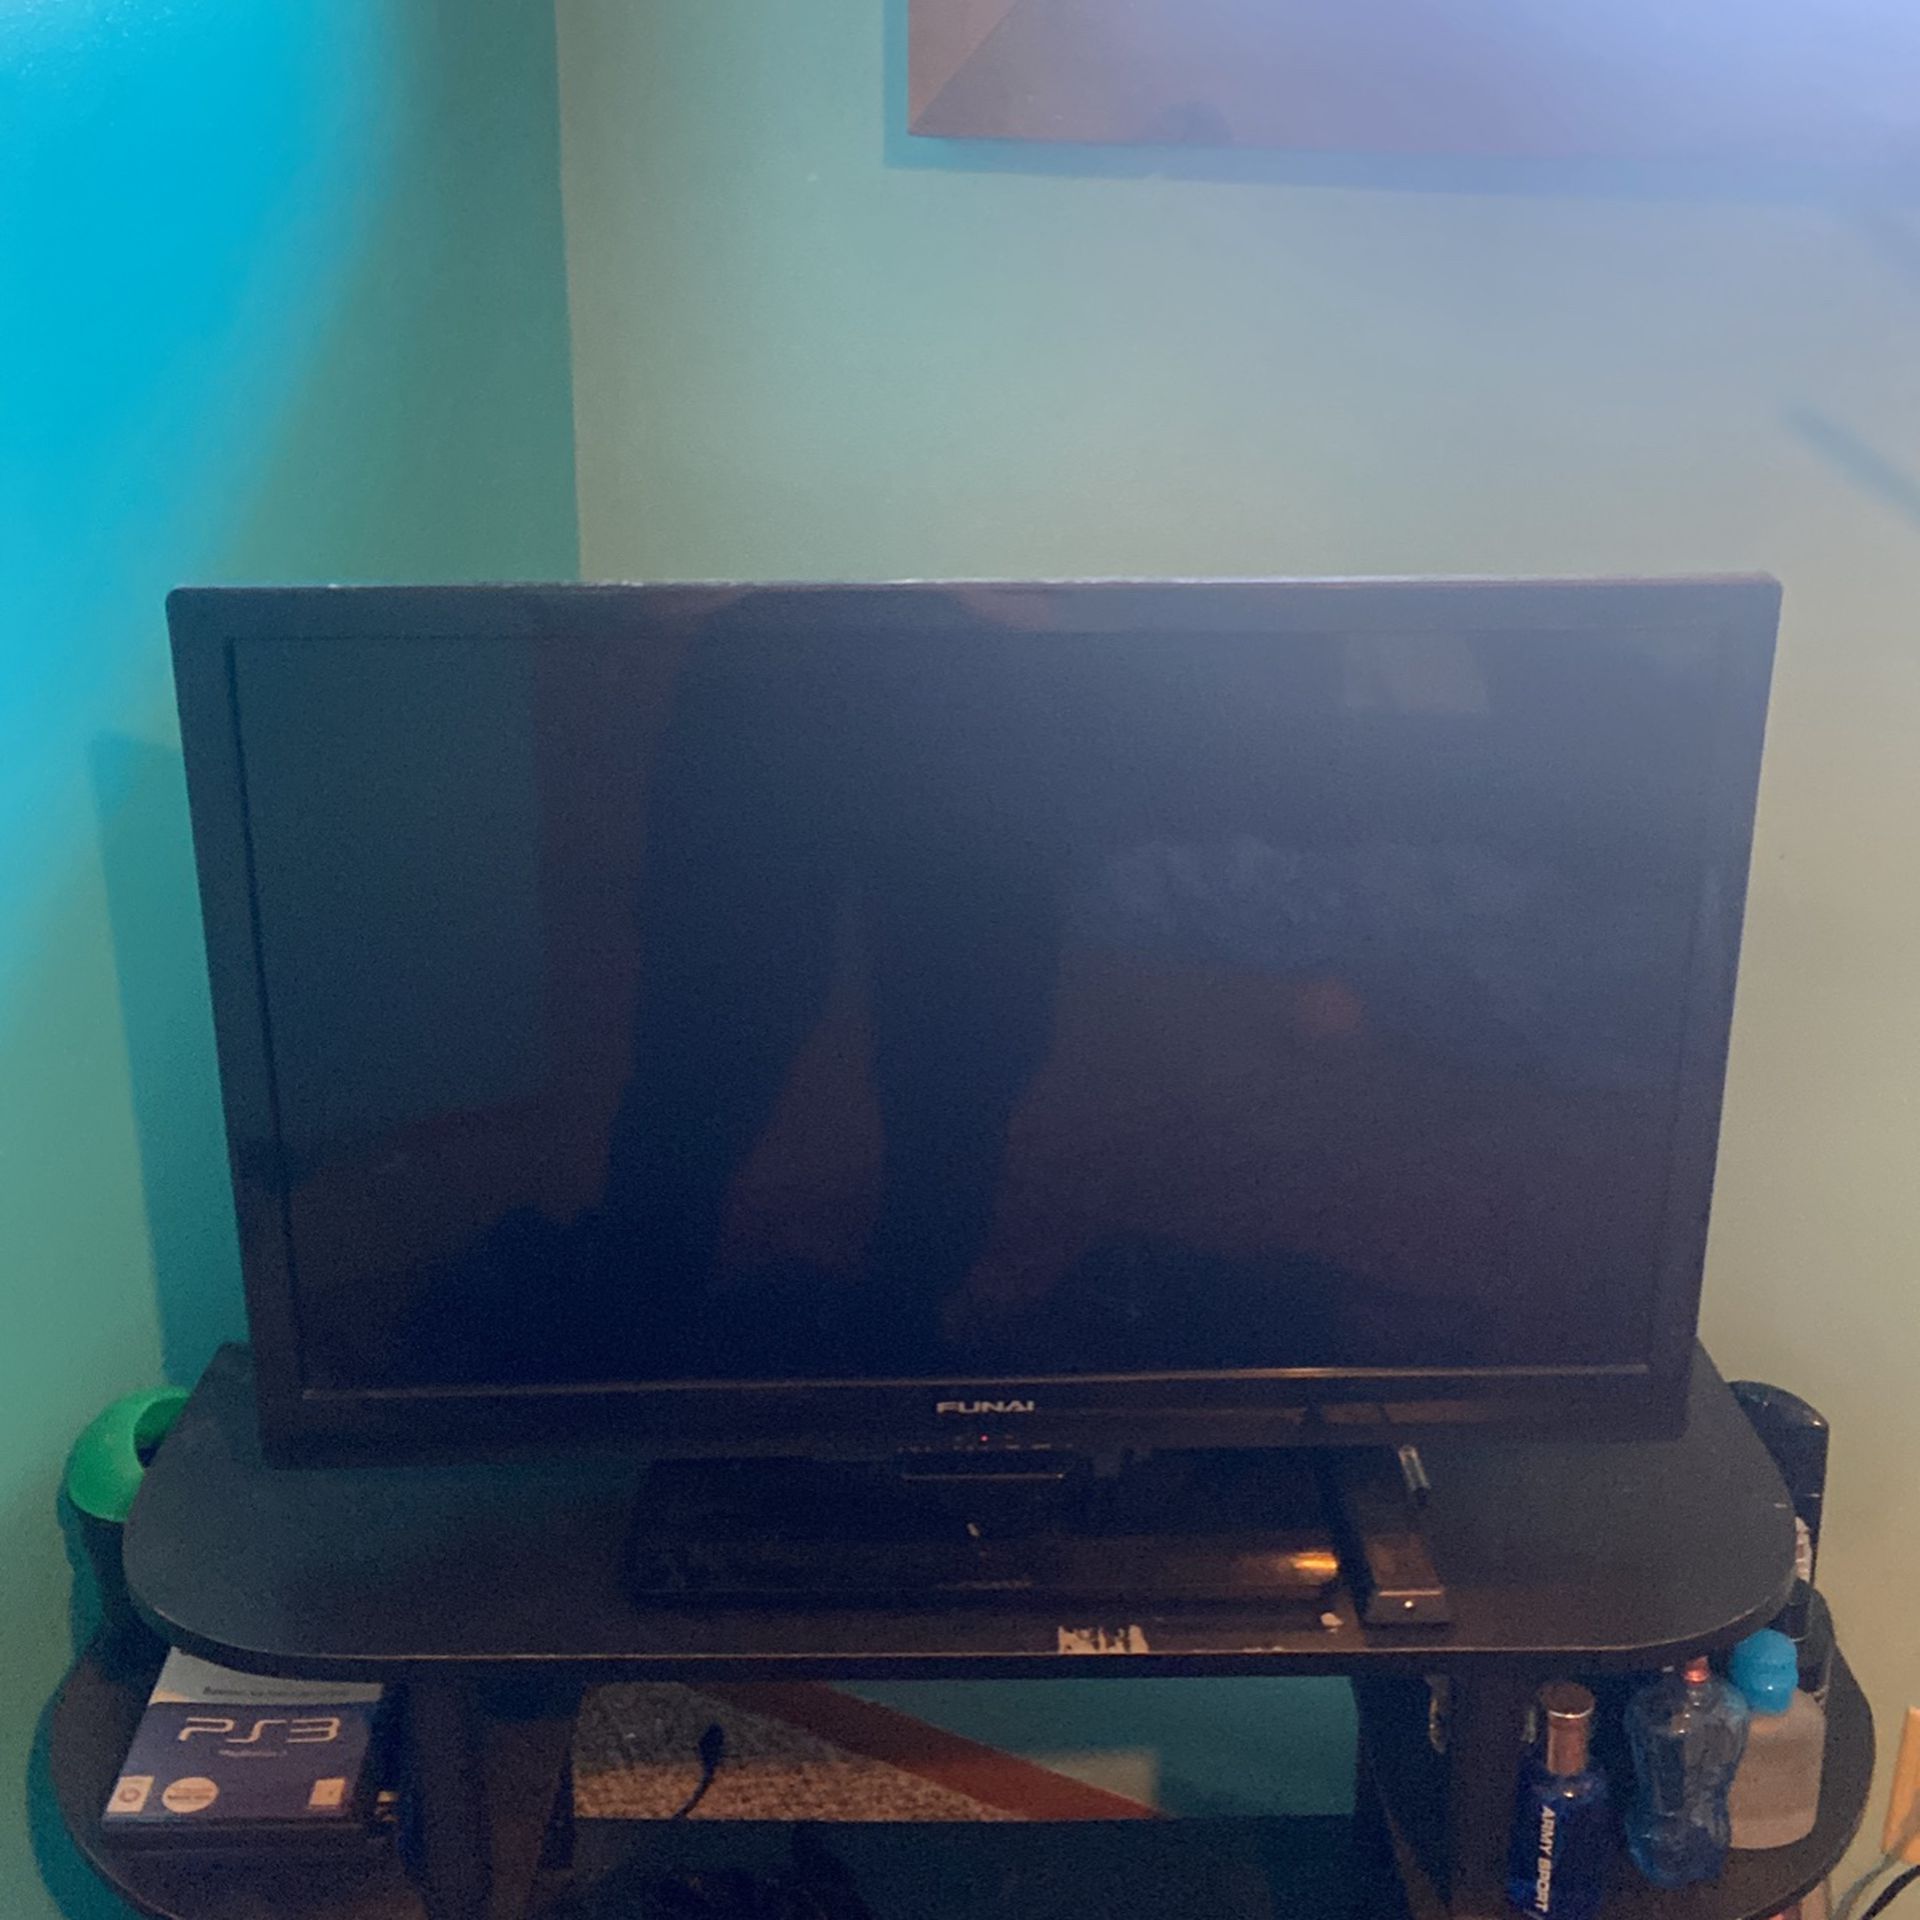 30 inch TV with power cord, HDMI cord and controller